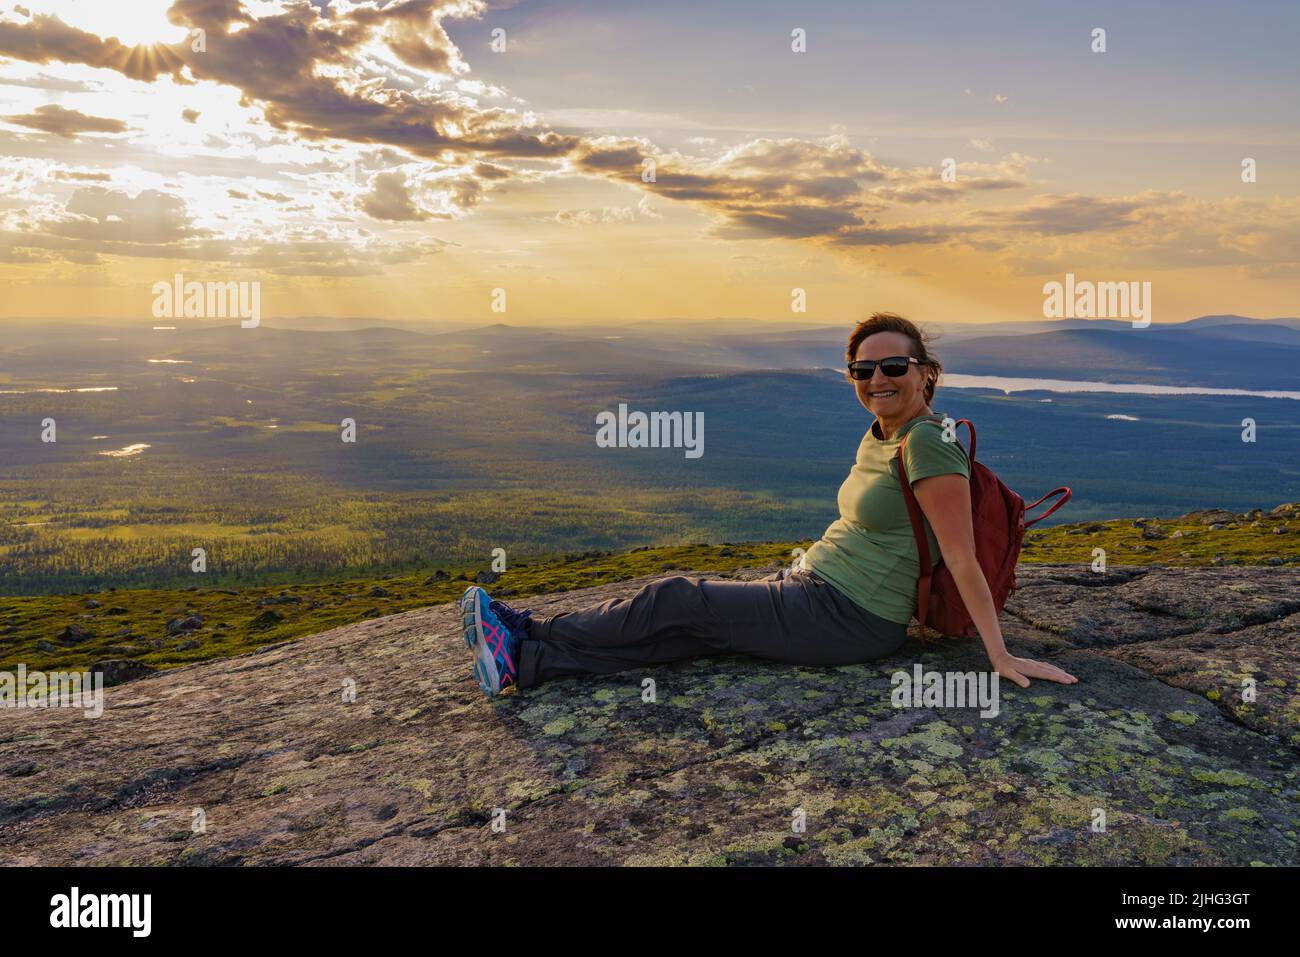 Woman sitting on mountain enjoying the view from Mount Dundret over Laponia, Gällivare county, Swedish Lapland, Sweden Stock Photo